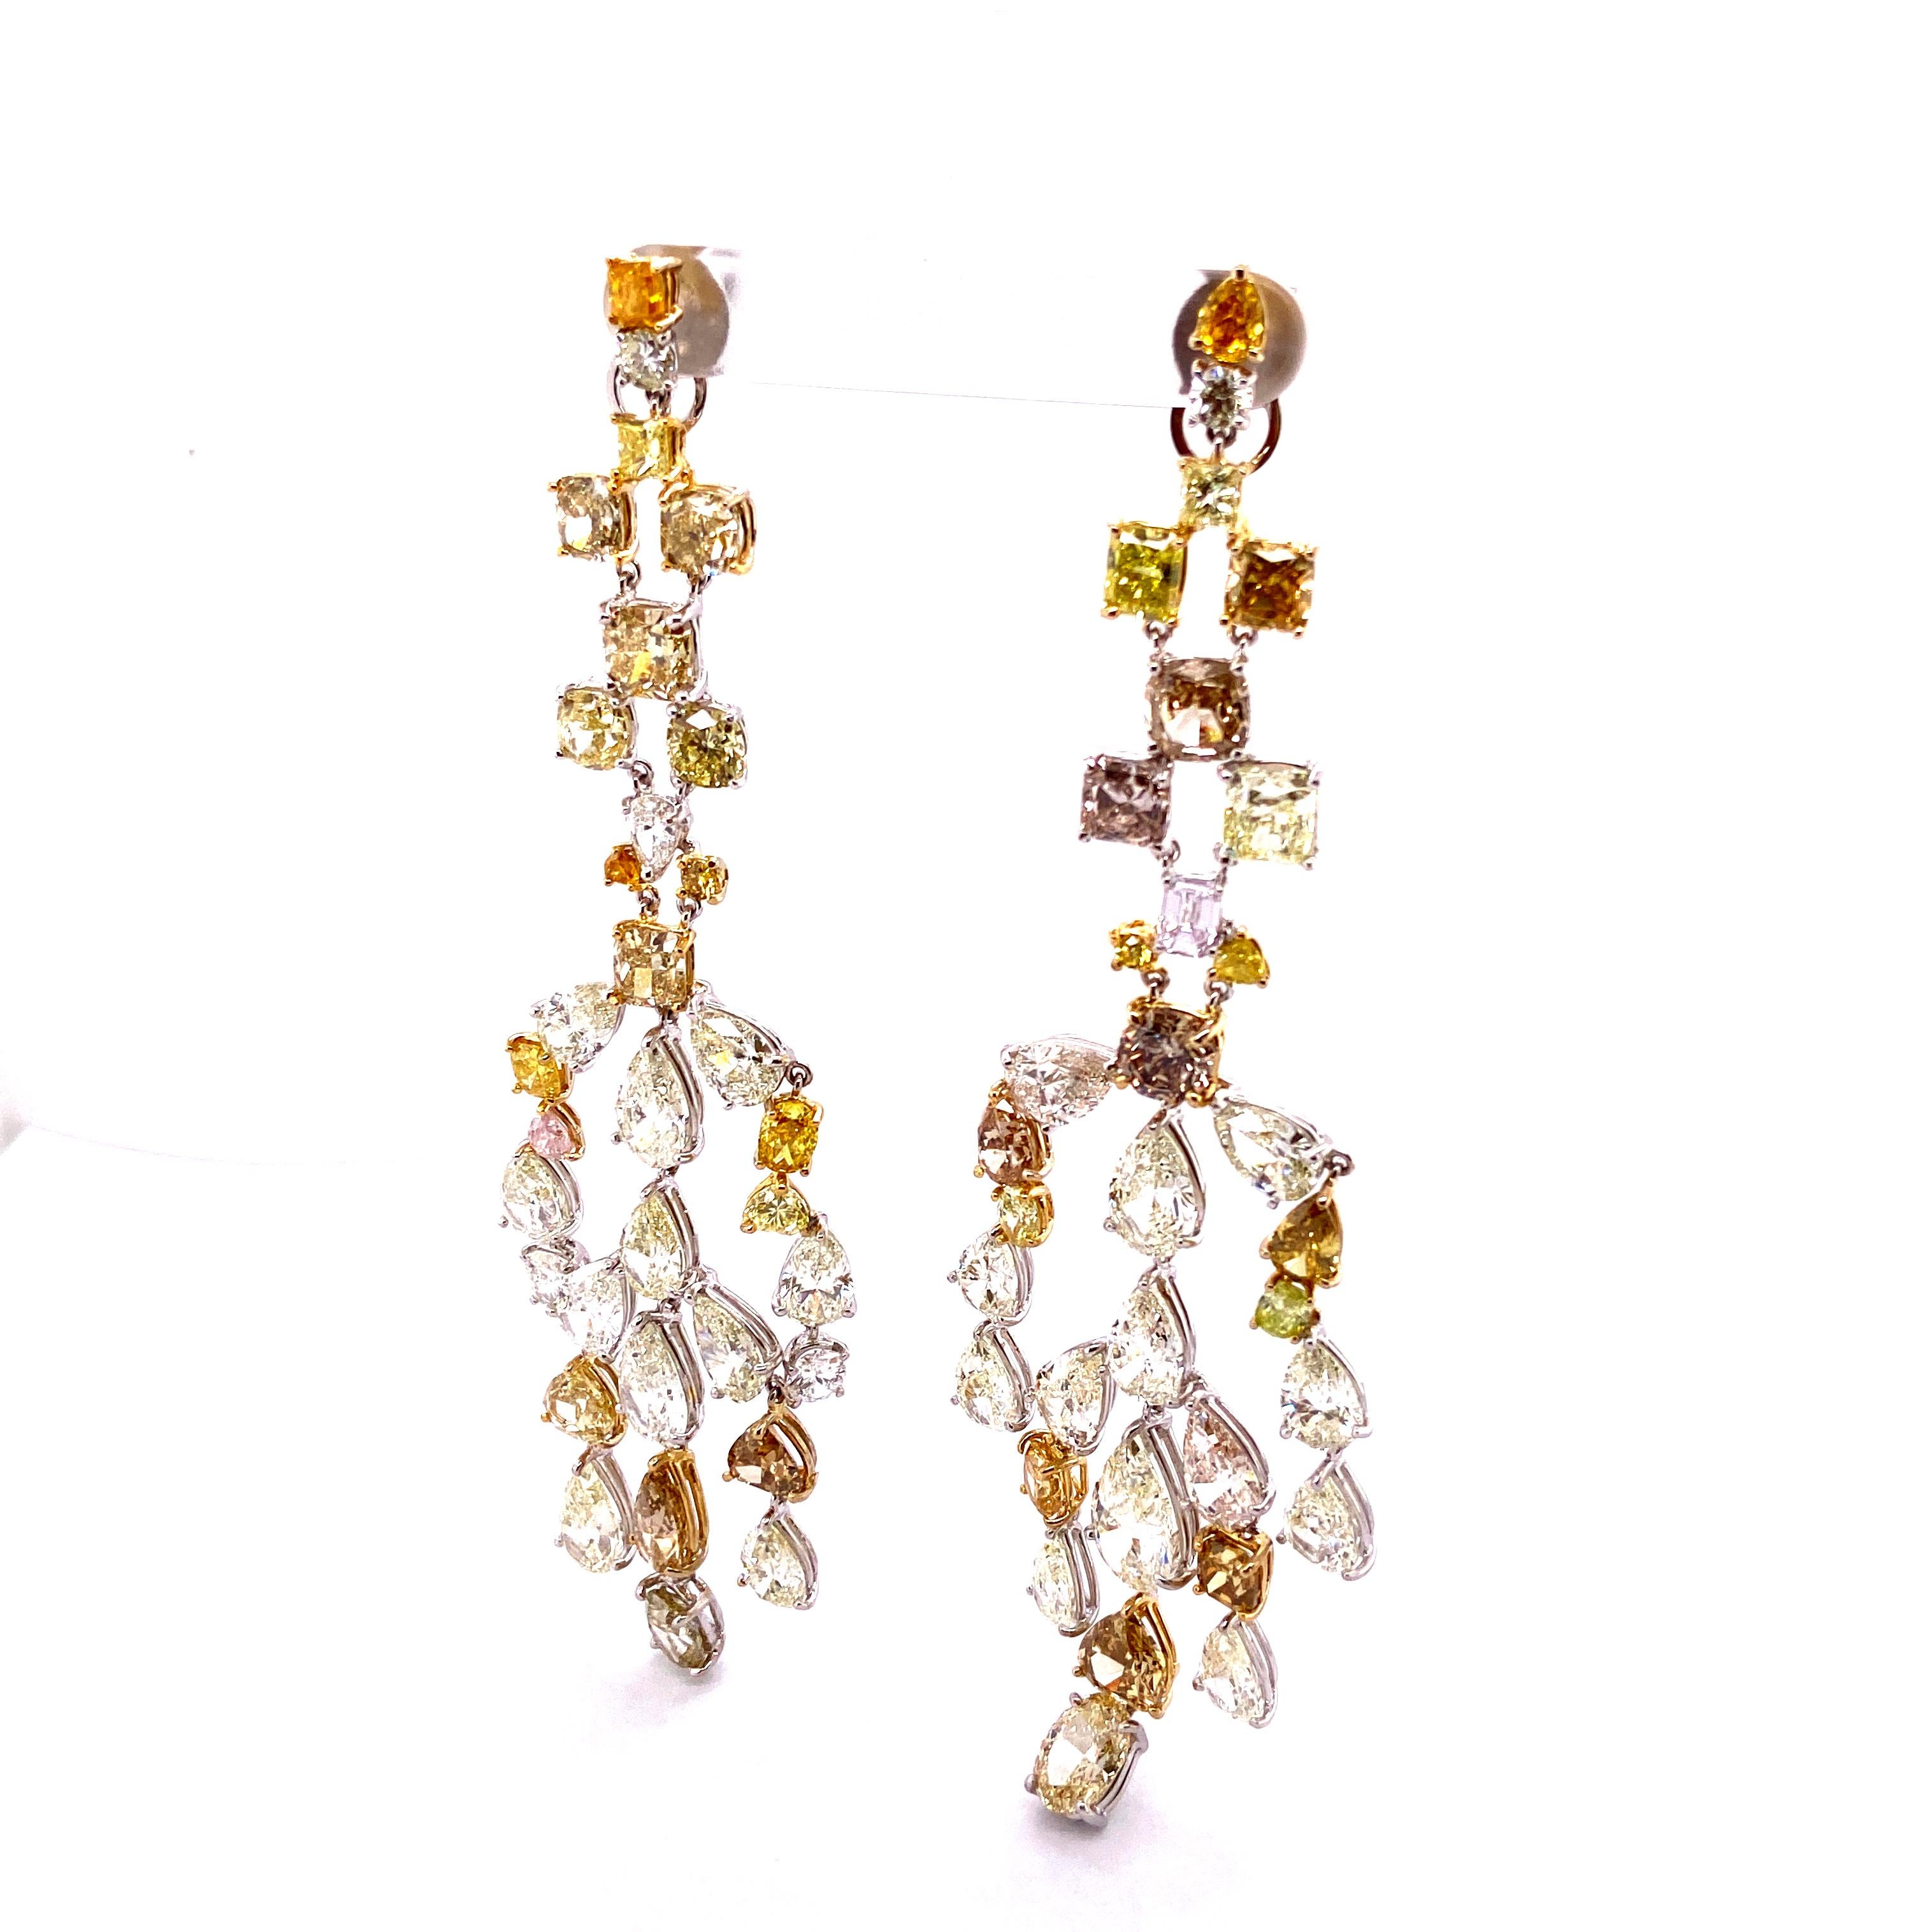 57.64 Carat Fancy Coloured Diamonds and White Diamond Chandelier Gold Earrings For Sale 8